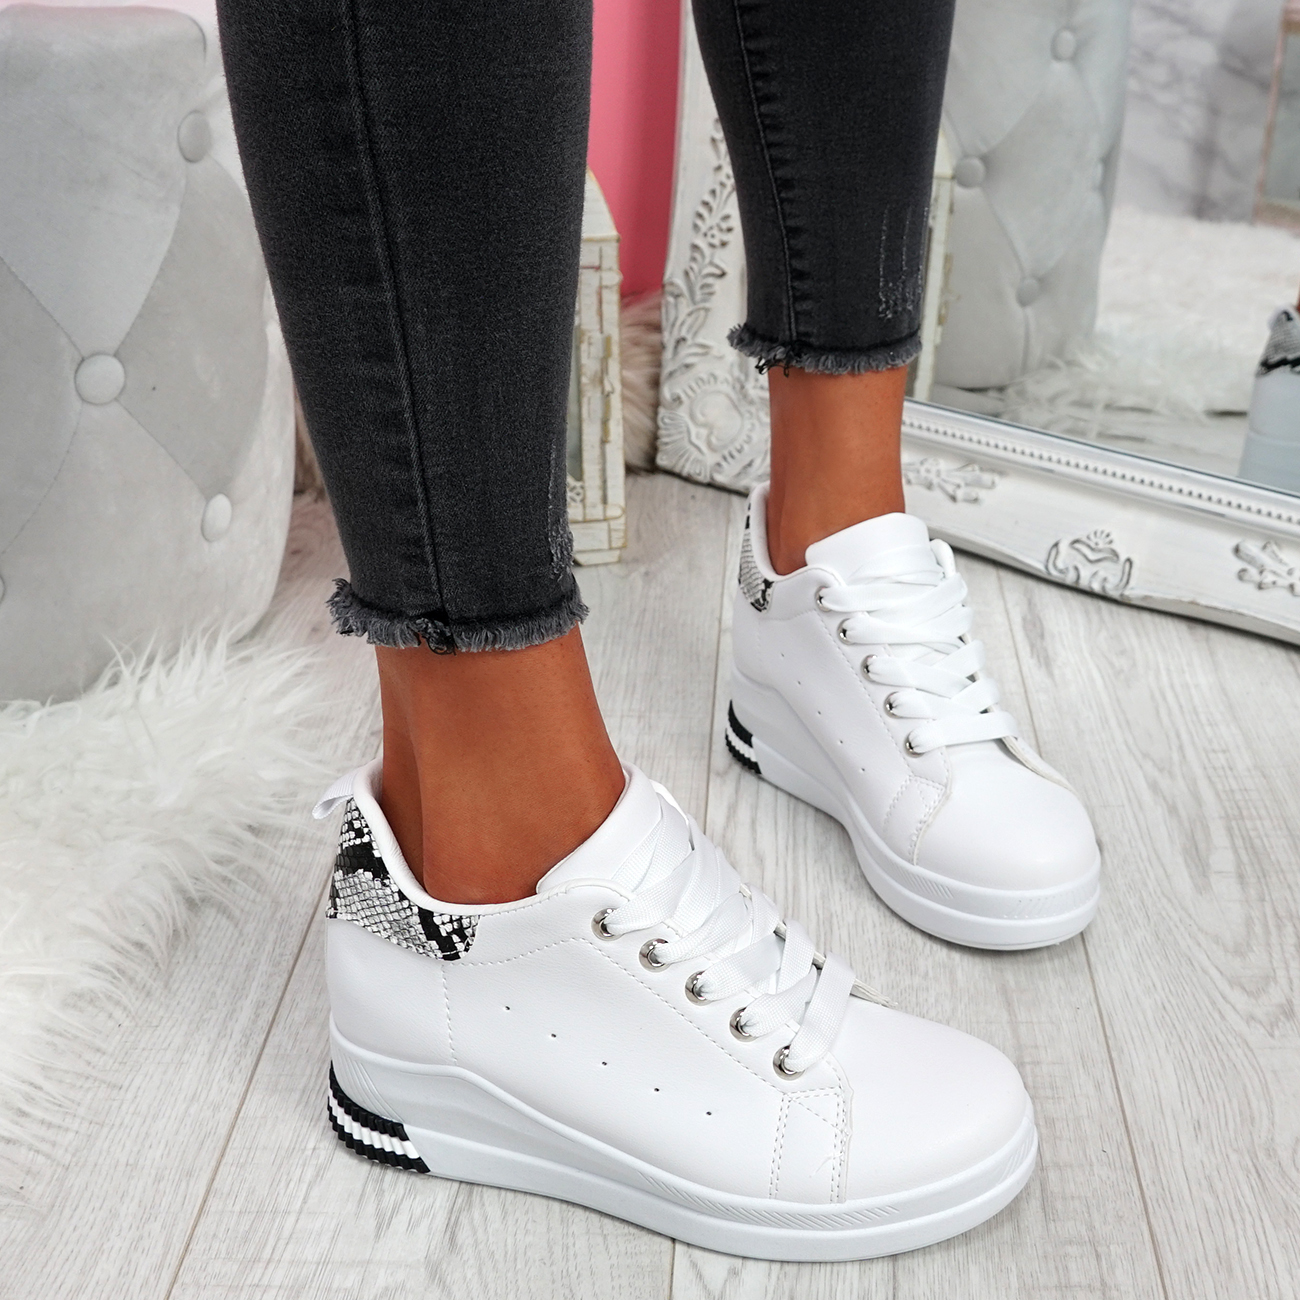 WOMENS LADIES LACE UP WEDGE PARTY TRAINERS WOMEN CASUAL FASHION ...